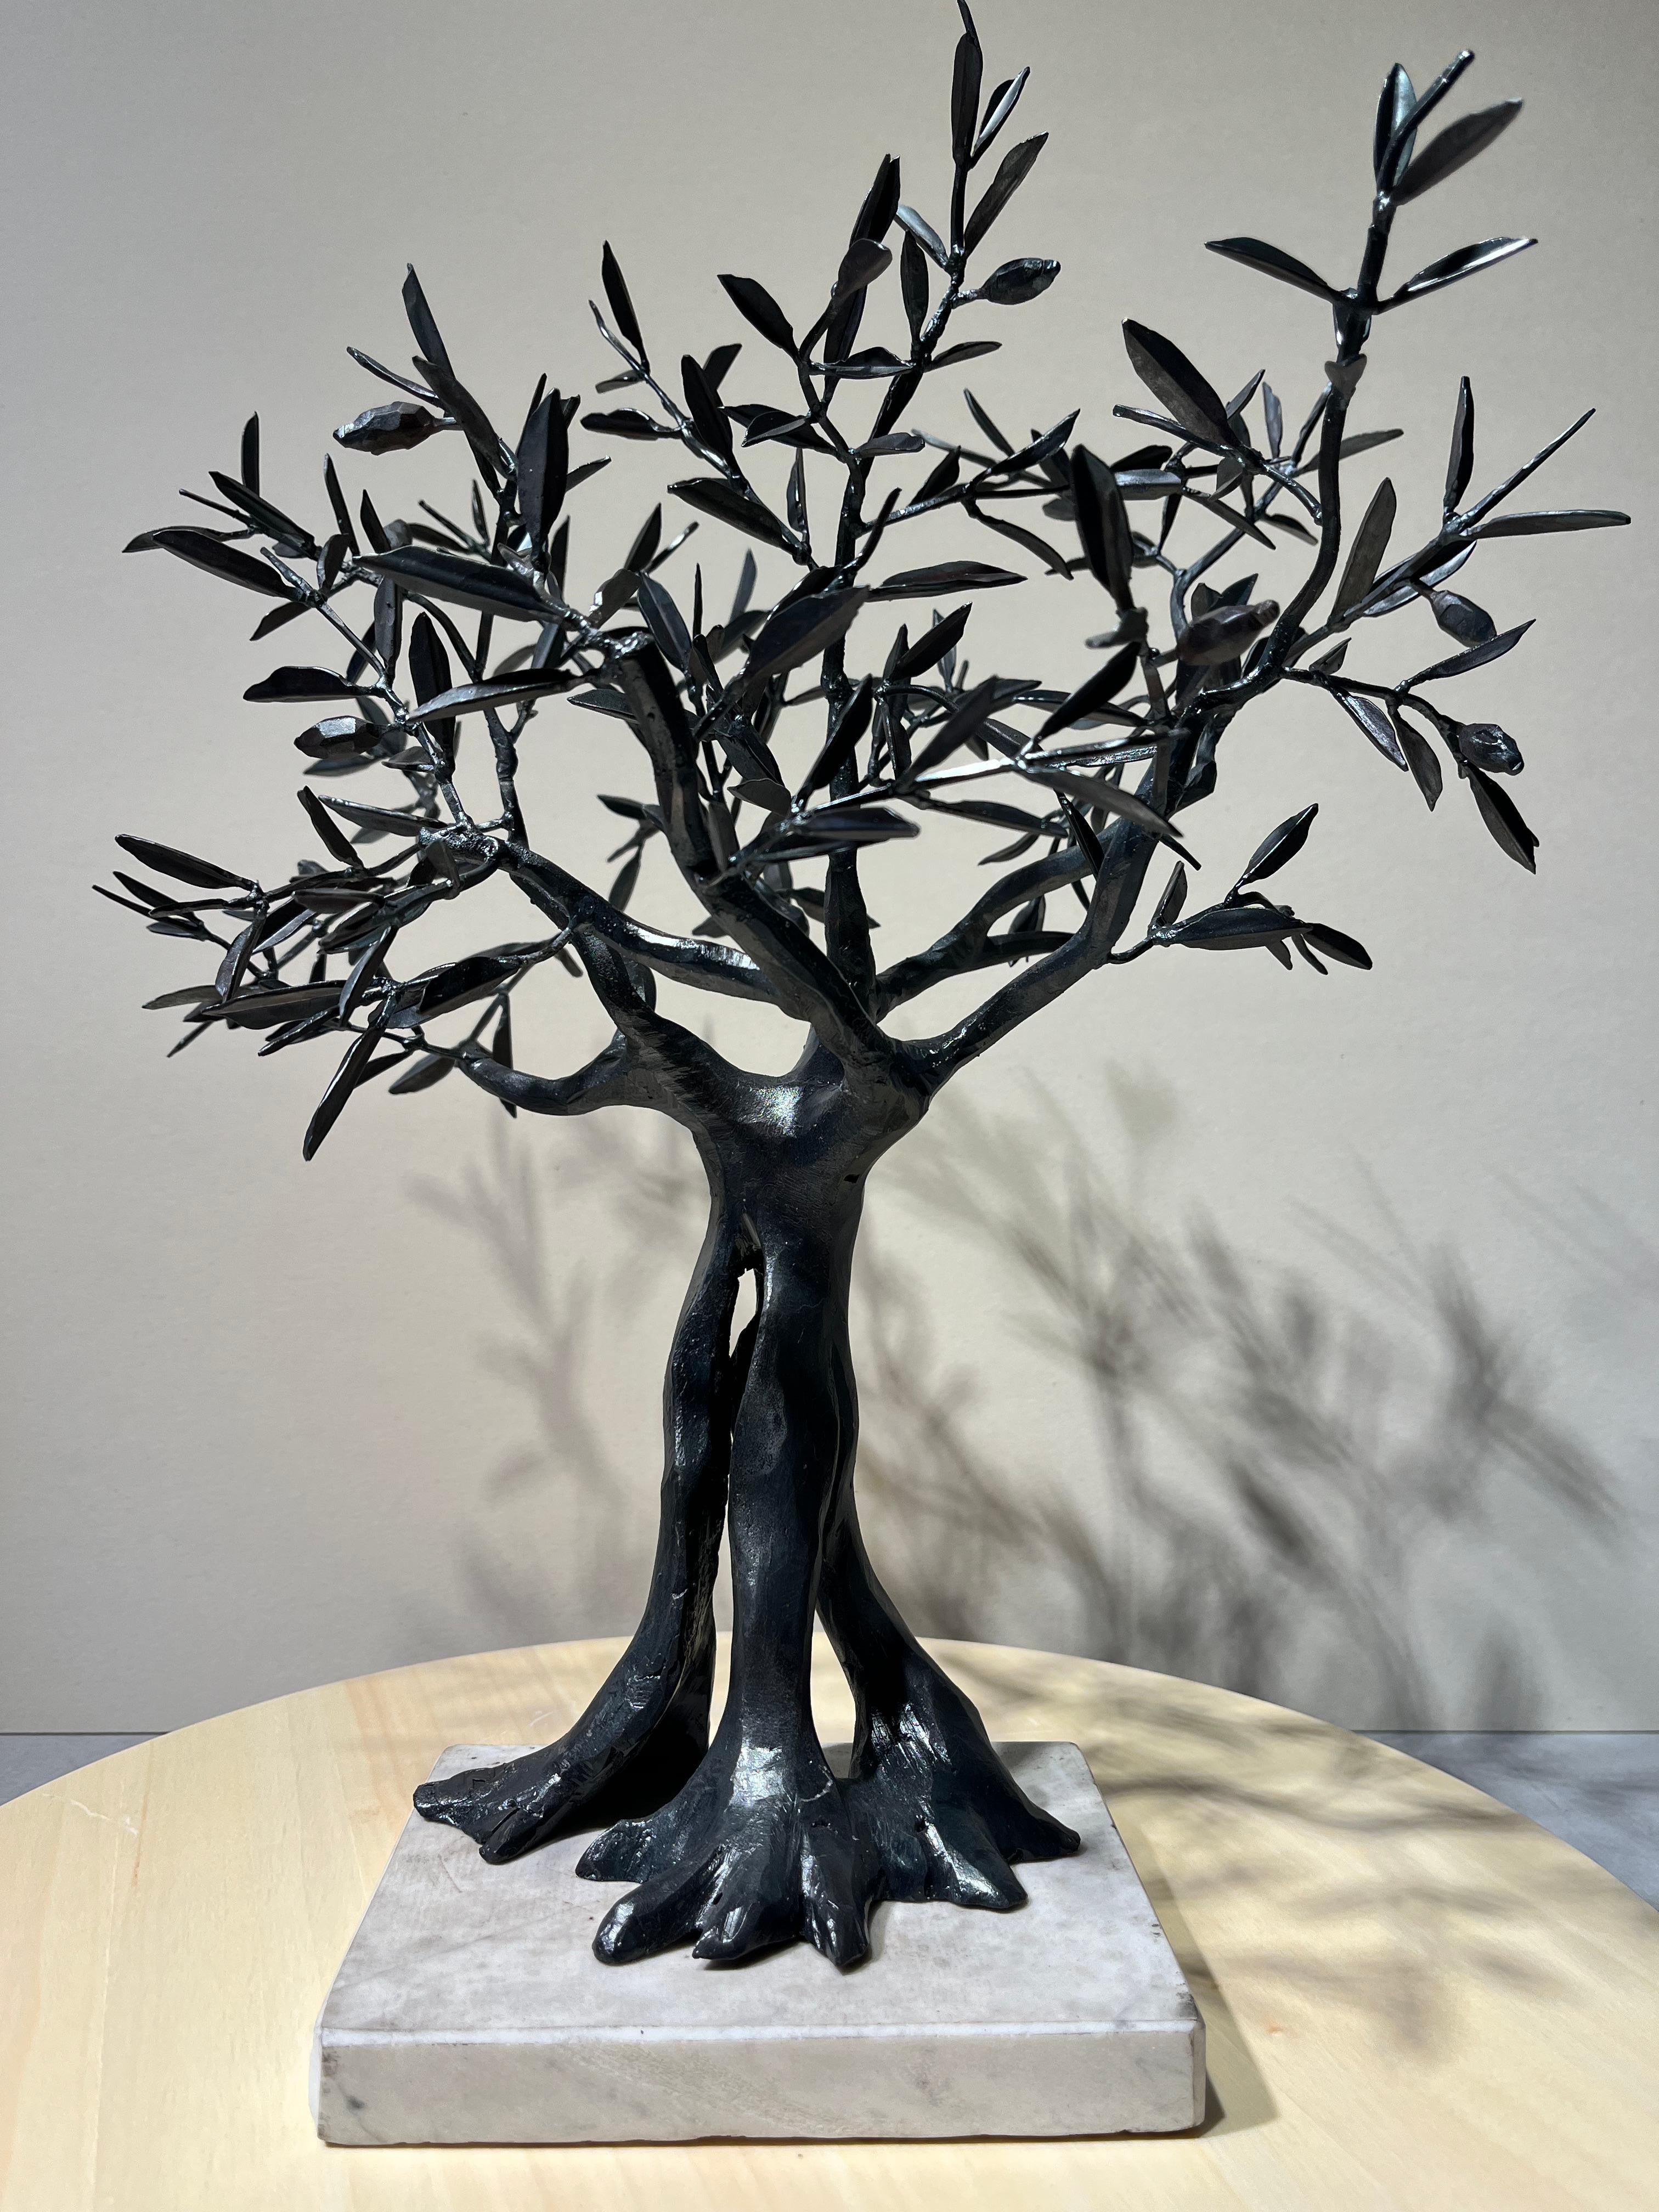 Bonsai Ulive tree black wrought iron sculpture by Italian master